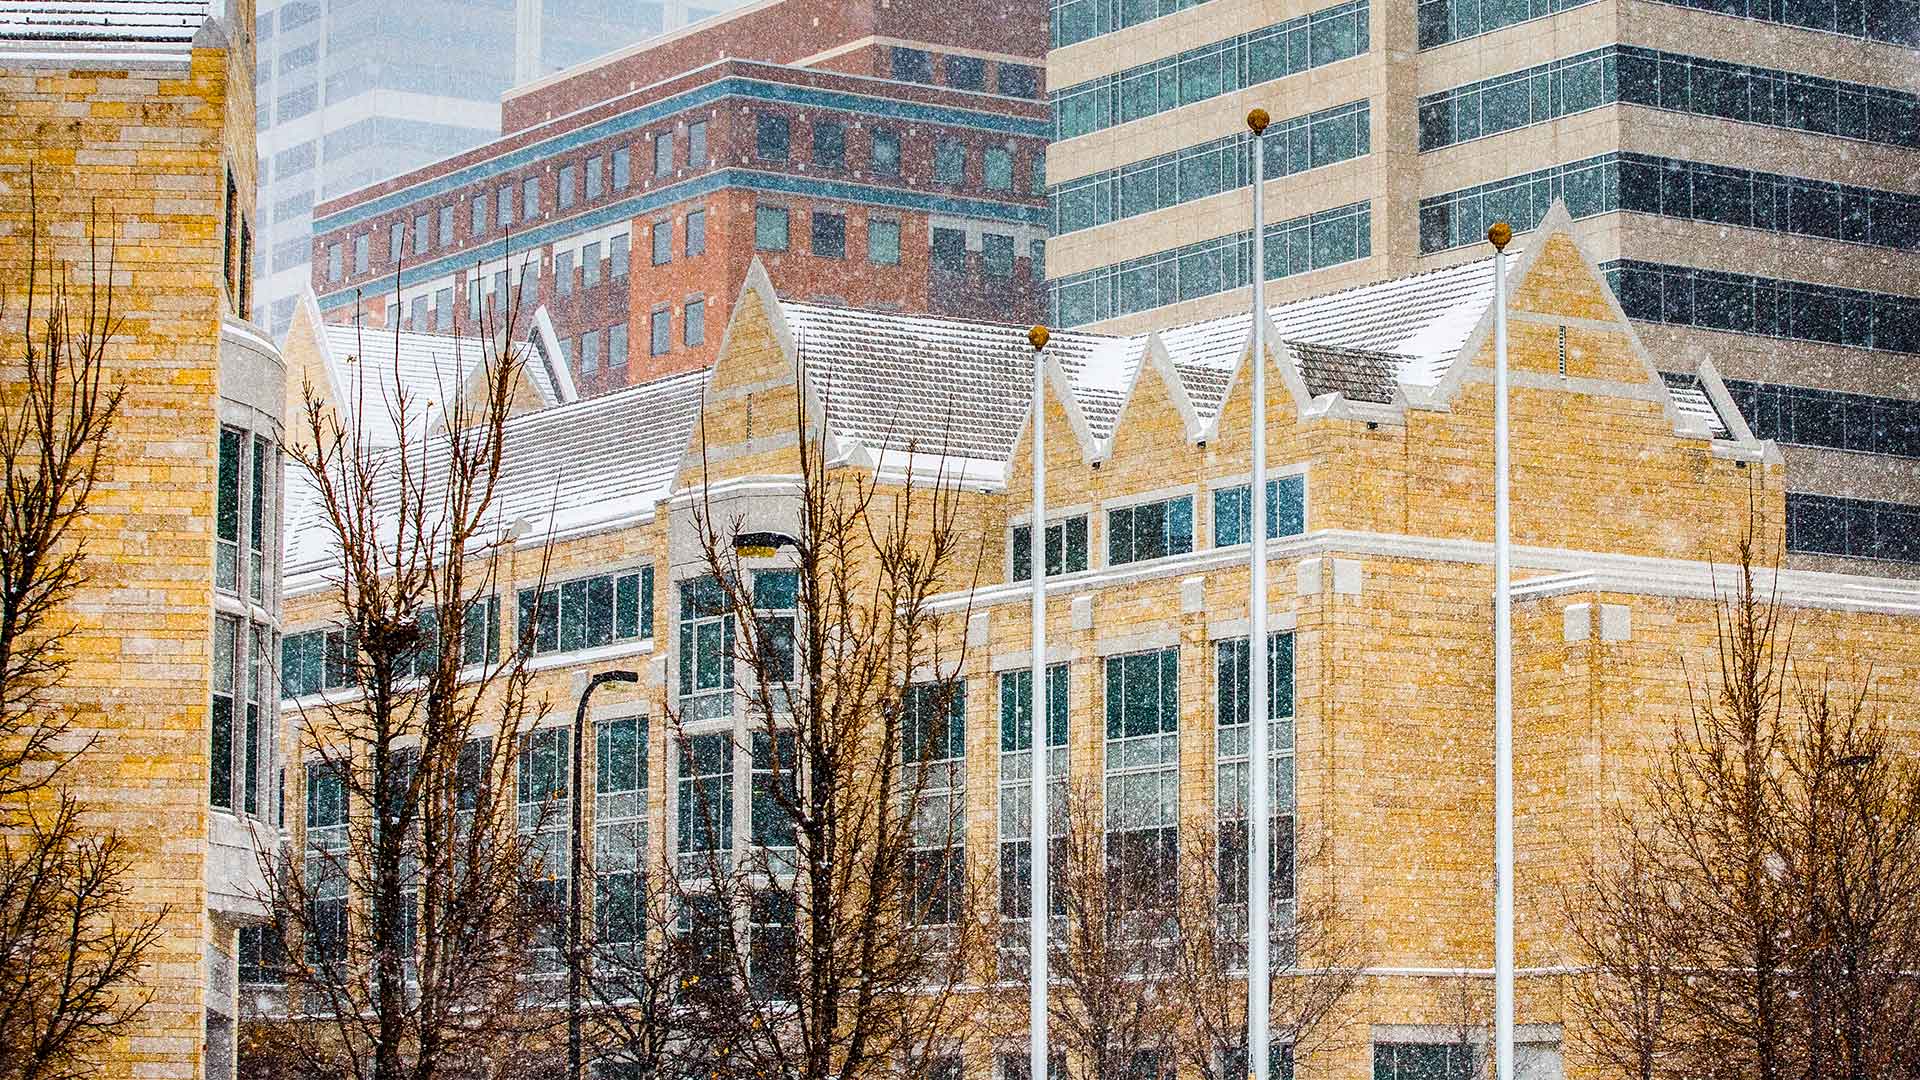 Terrence Murphy Hall pictured during a winter snowfall.